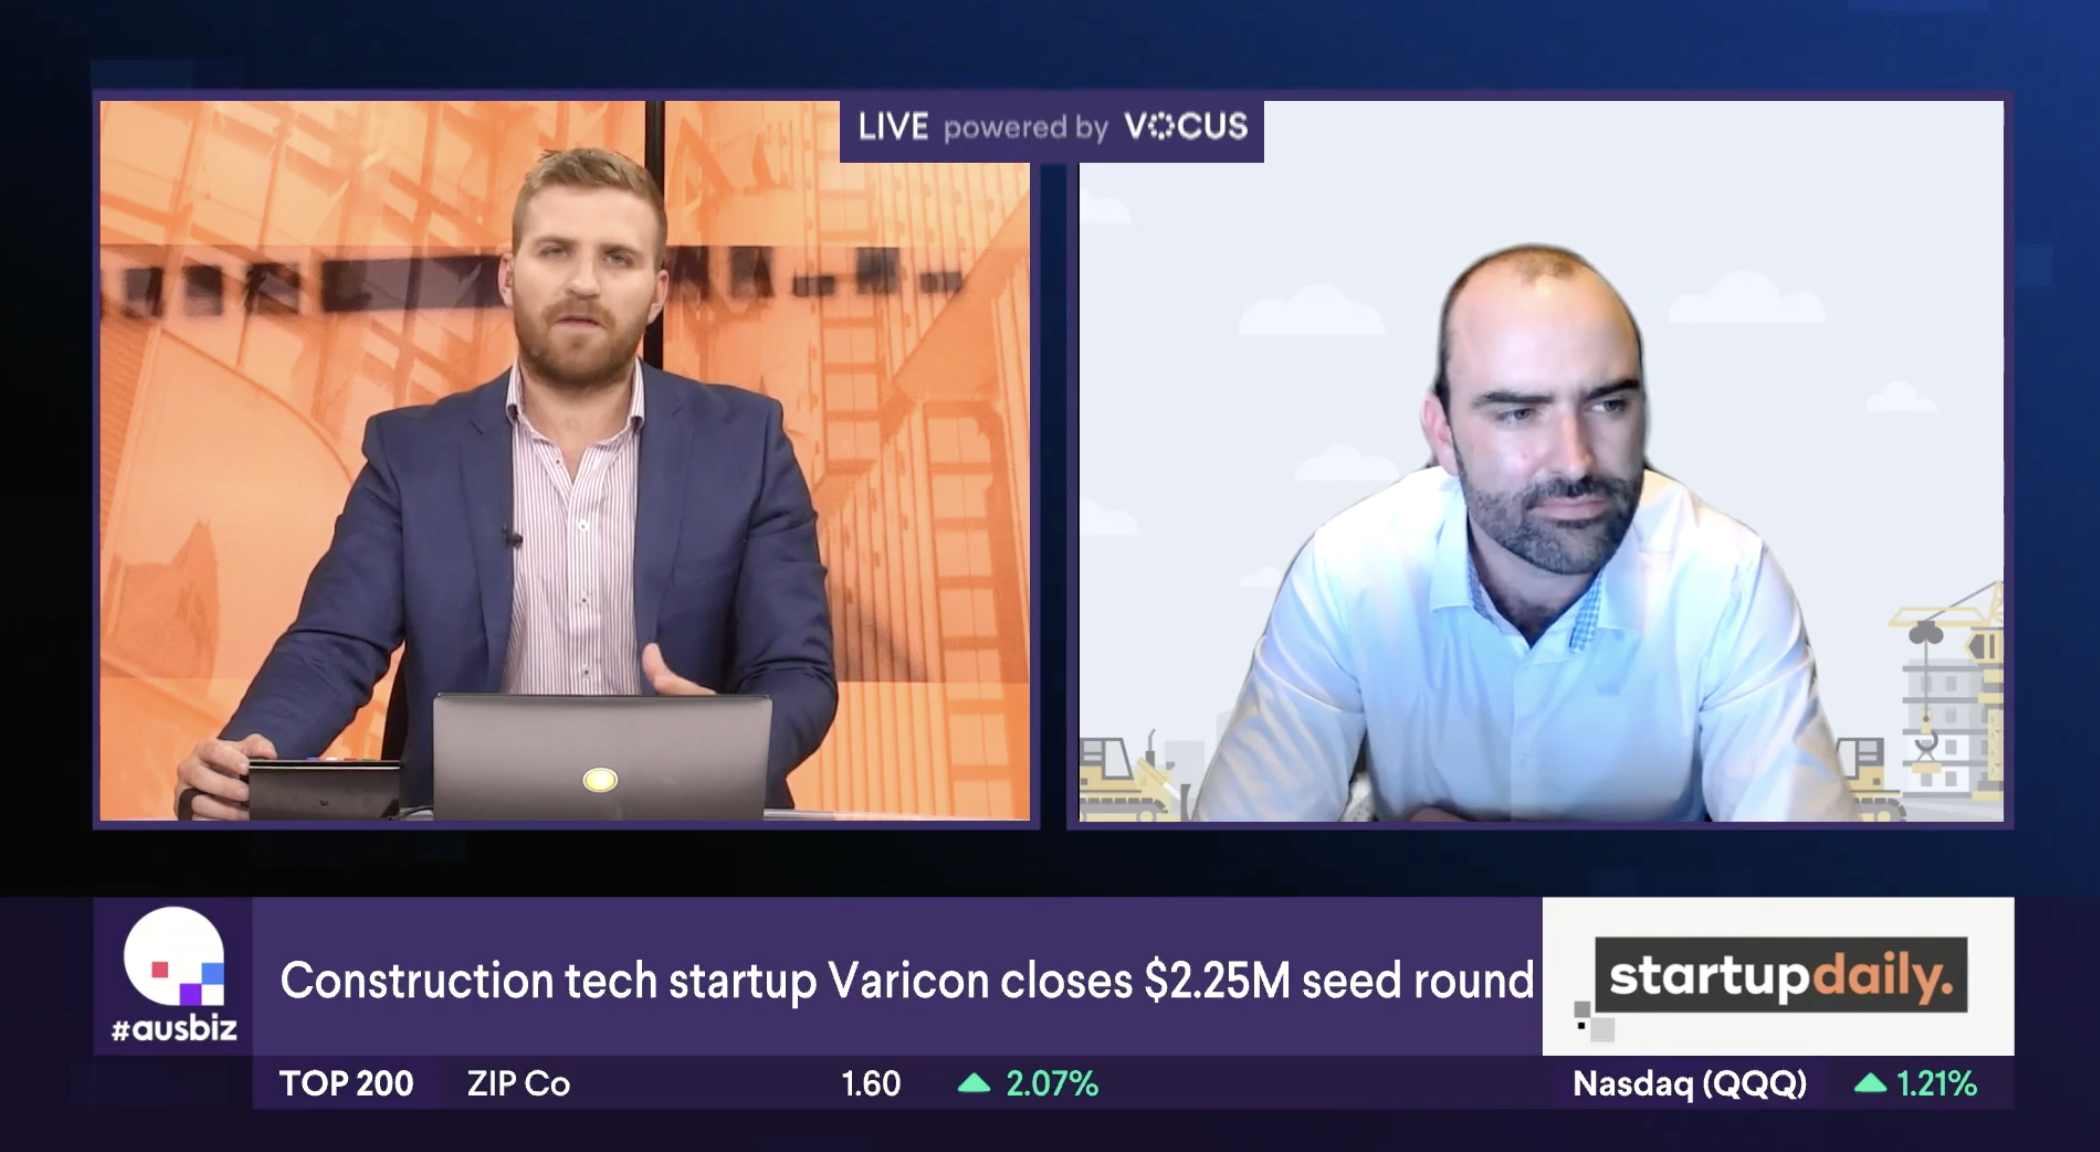 Startup Daily covers Varicon’s $2.25M funding round led by Black Nova VC